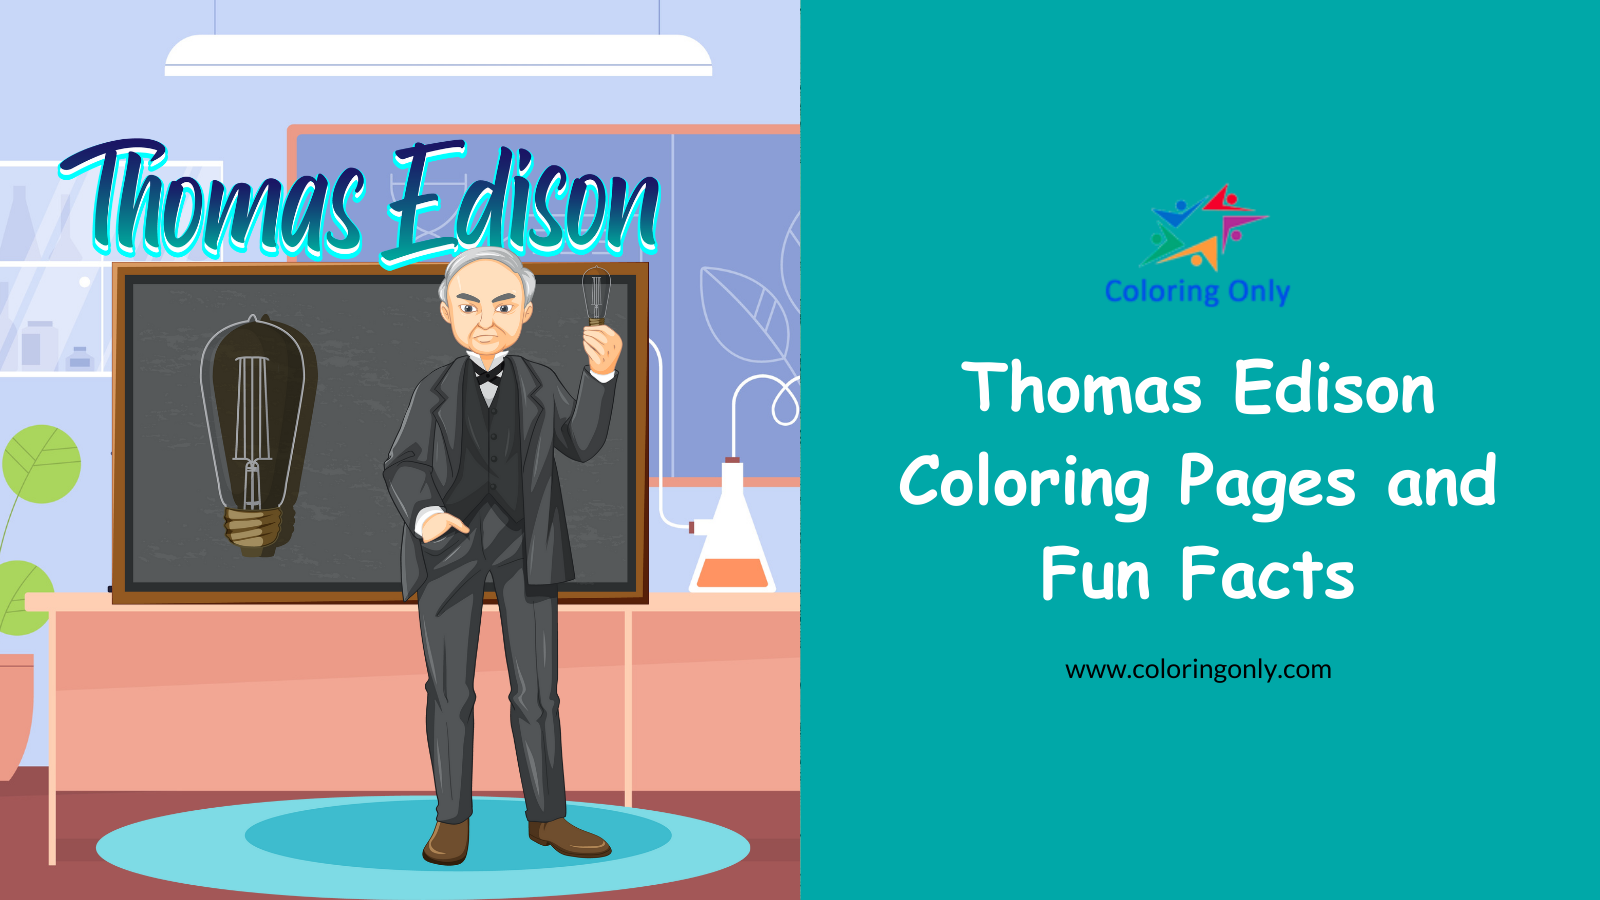 Thomas Edison Coloring Pages and Fun Facts